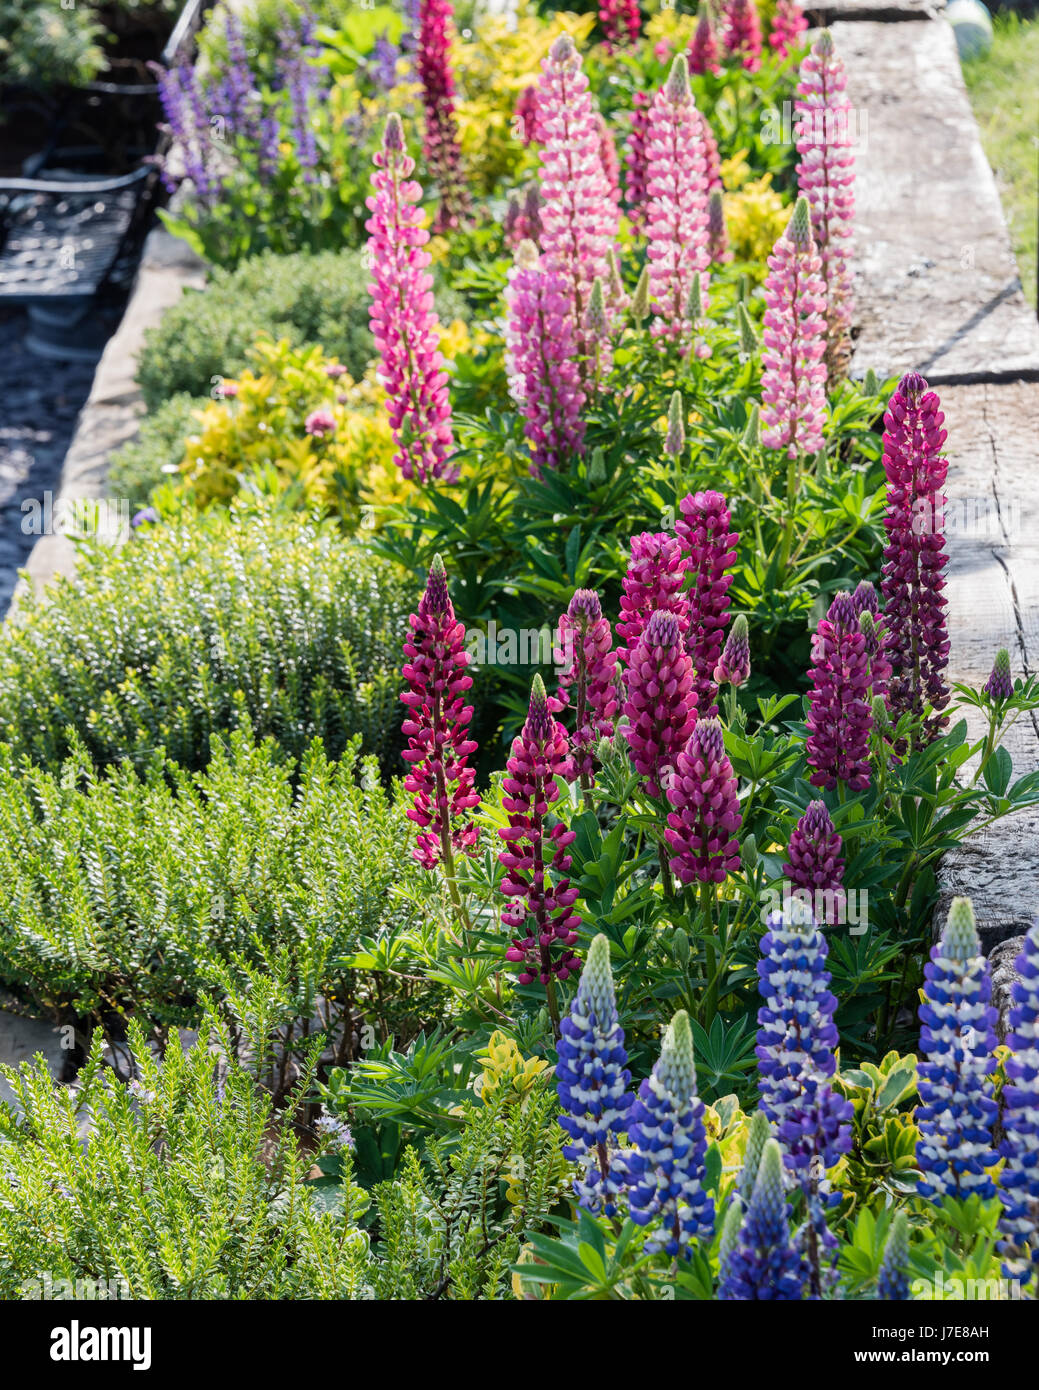 Raised bed of lupins (Lupinus) in garden Stock Photo